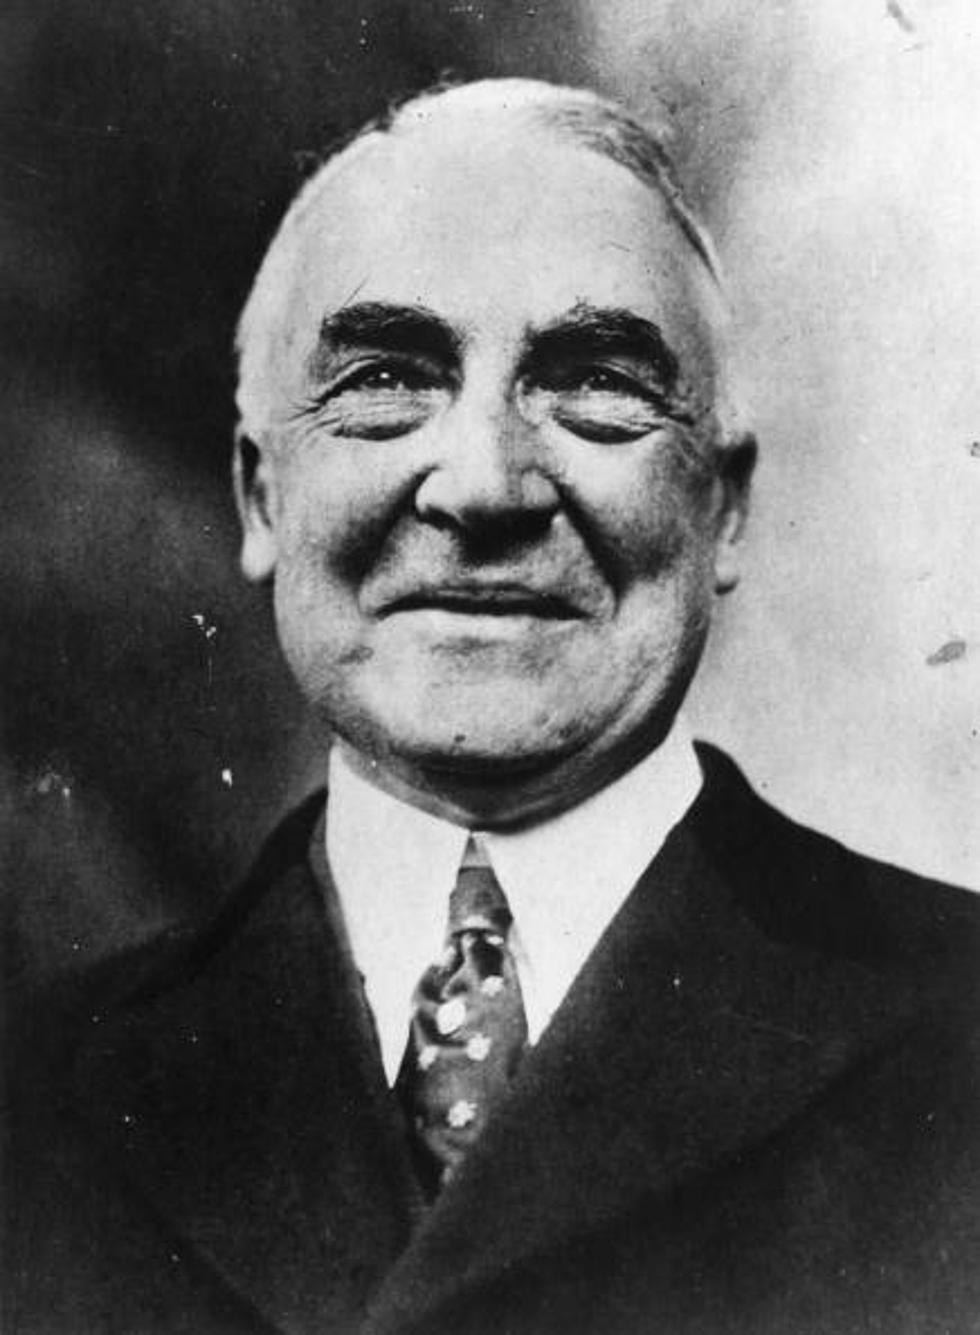 President Harding’s Juicy Love Letters To His Mistress Revealed [Video]